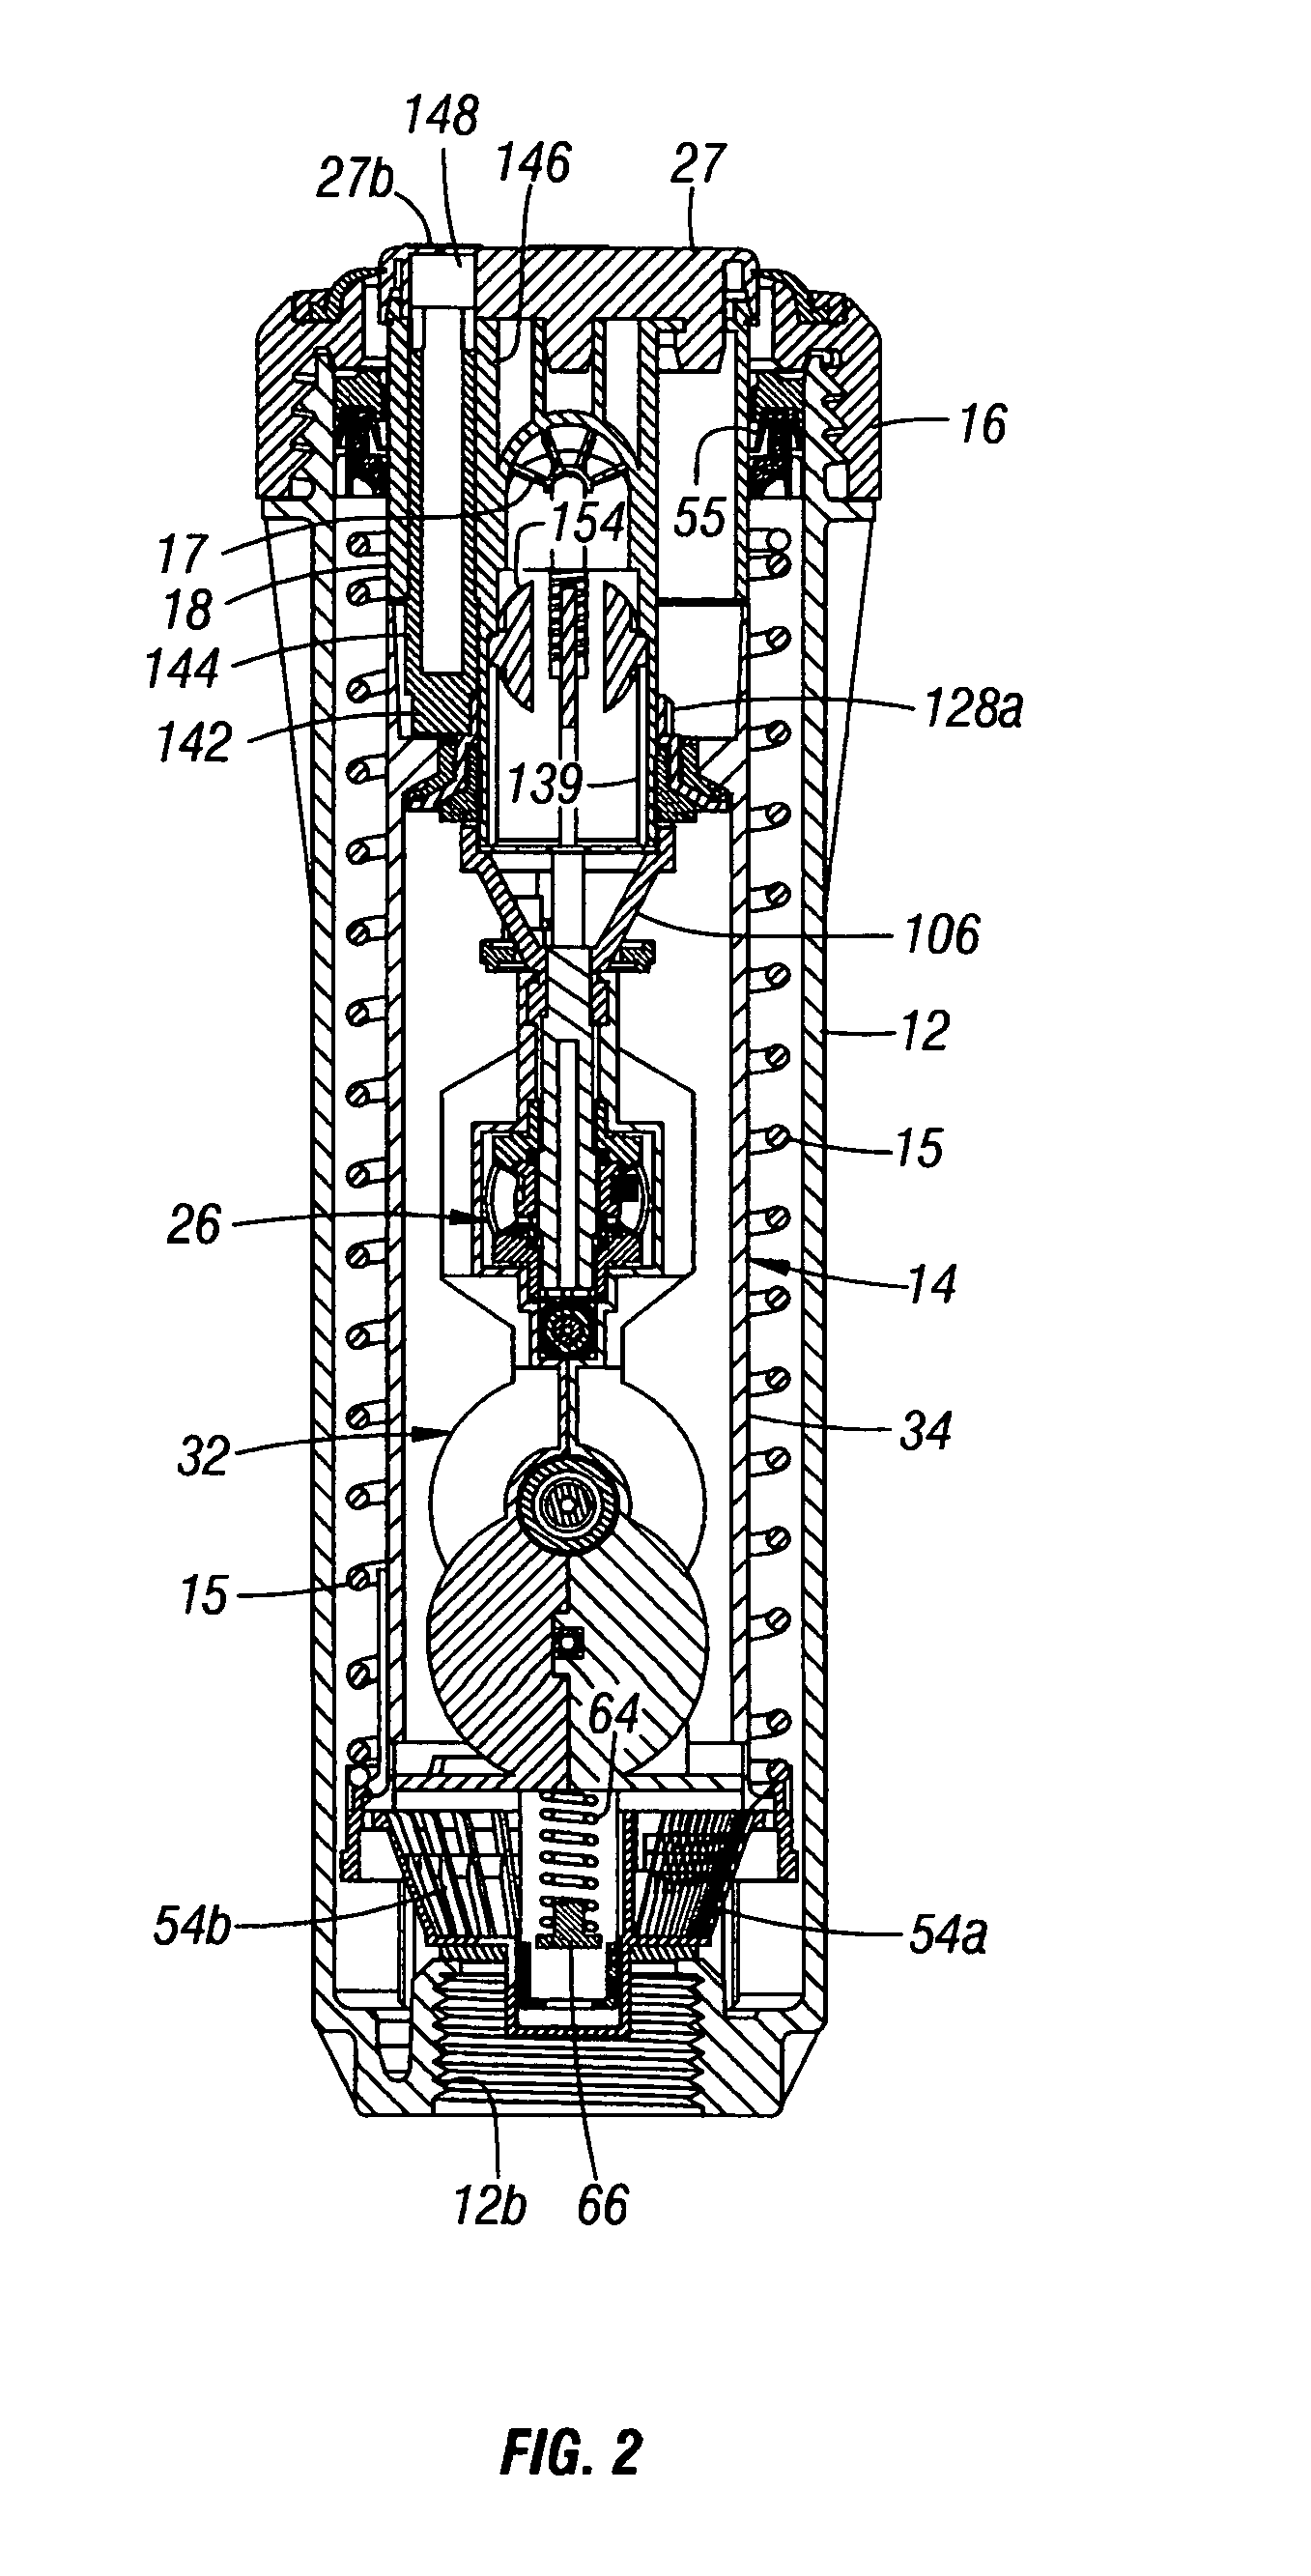 Rotor type sprinkler with reversing mechanism including sliding clutch and driven bevel gears